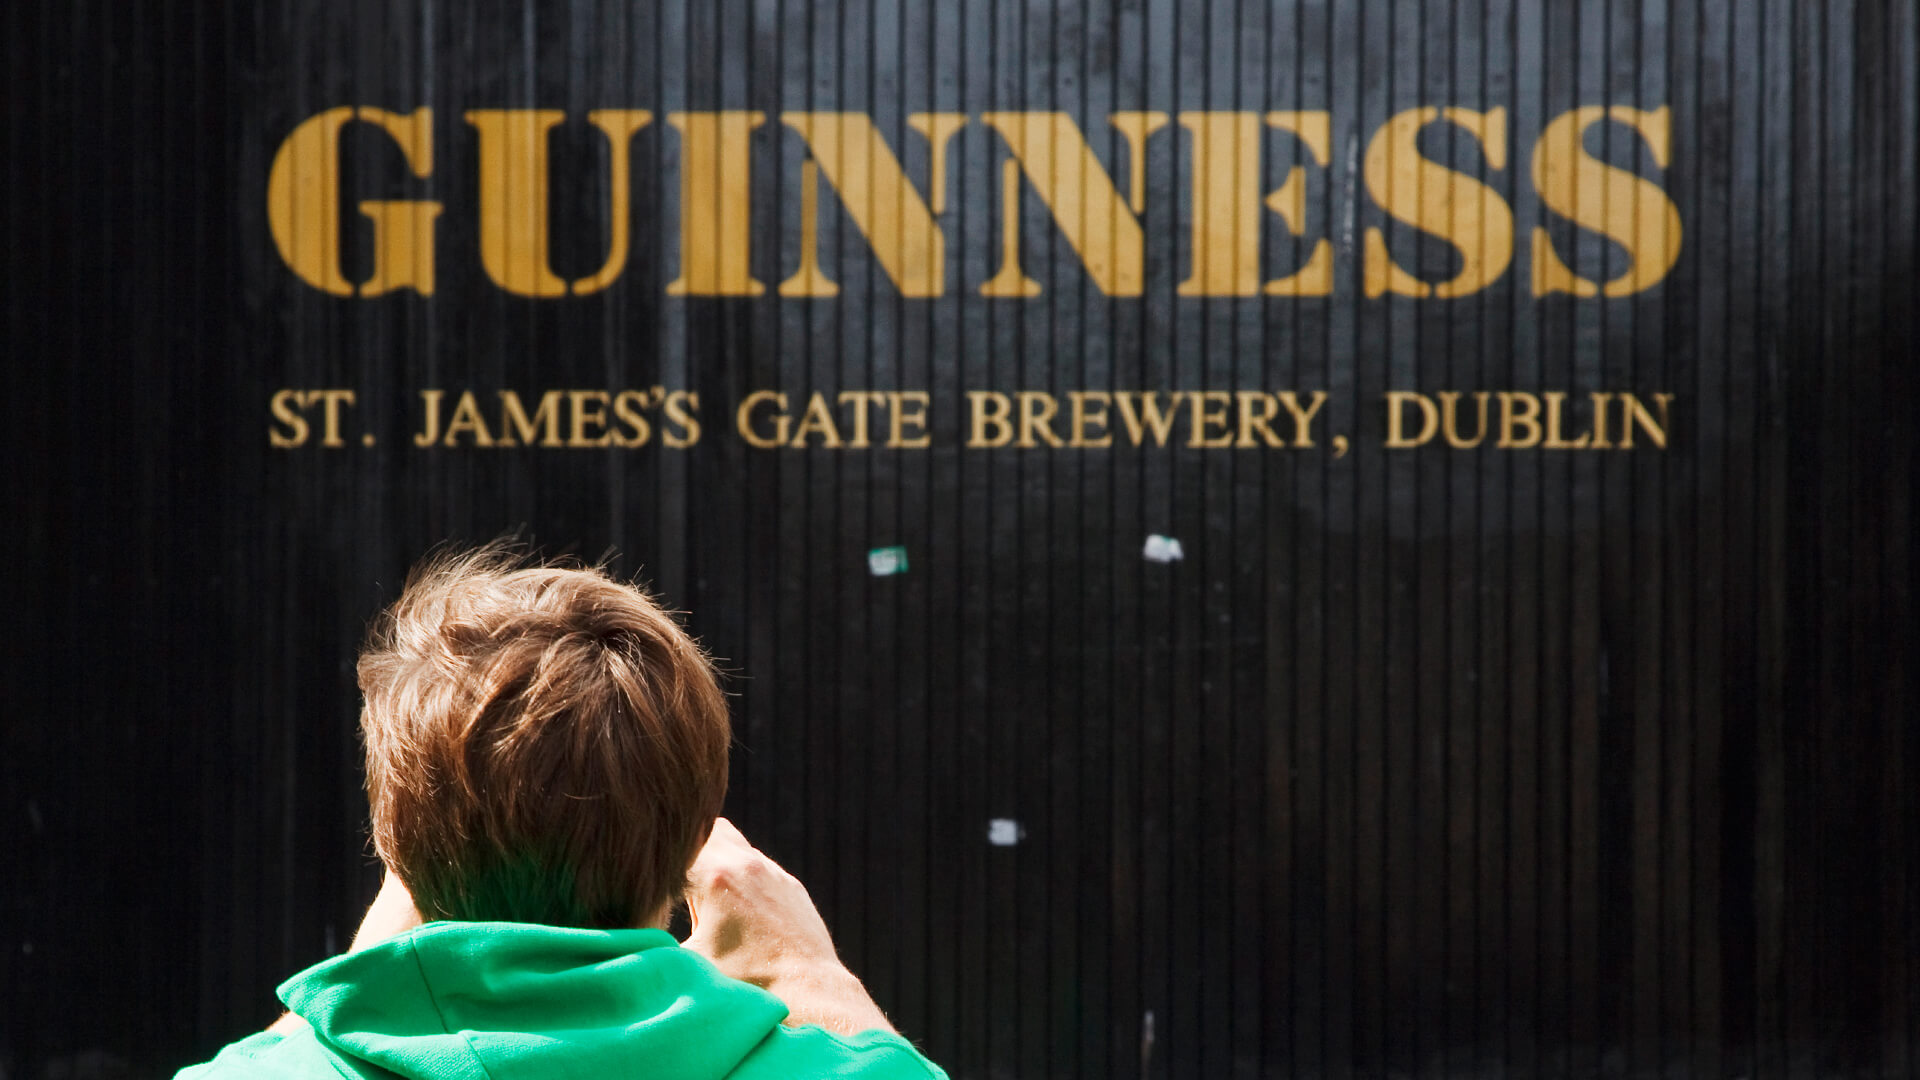 A man takes a photo of St James's Gate. On it, painted in gold, are the words: "Guinness St. James's Gate Brewery, Dublin"